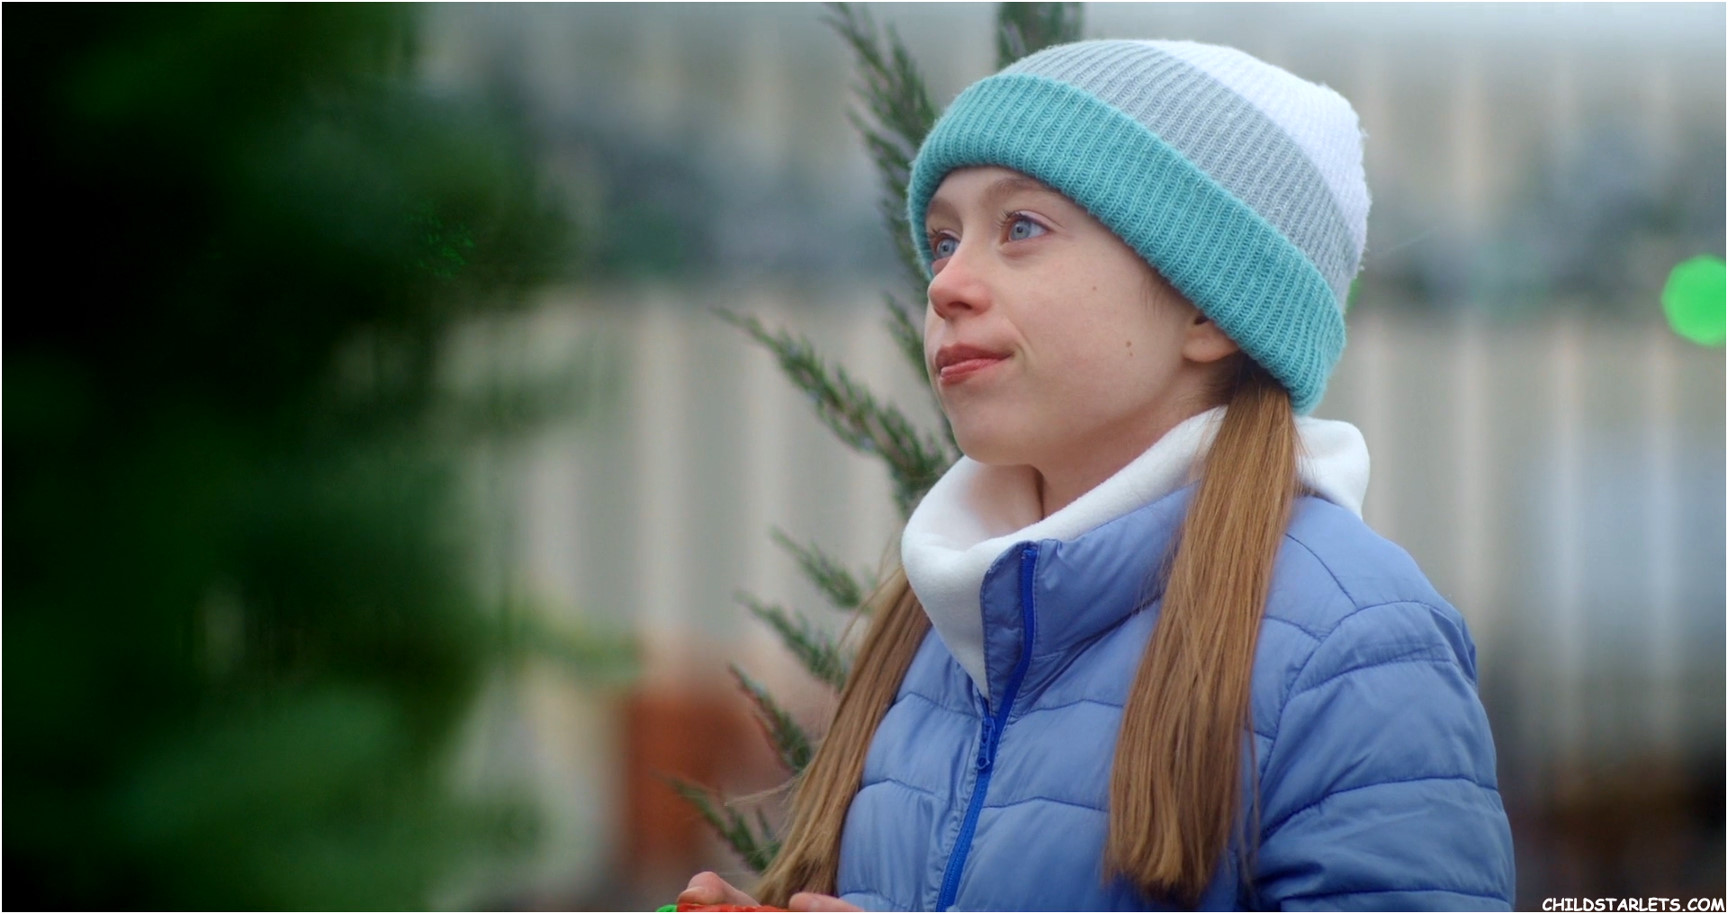 Eliza Donaghy
"Love at the Christmas Contest" - 2022/HD